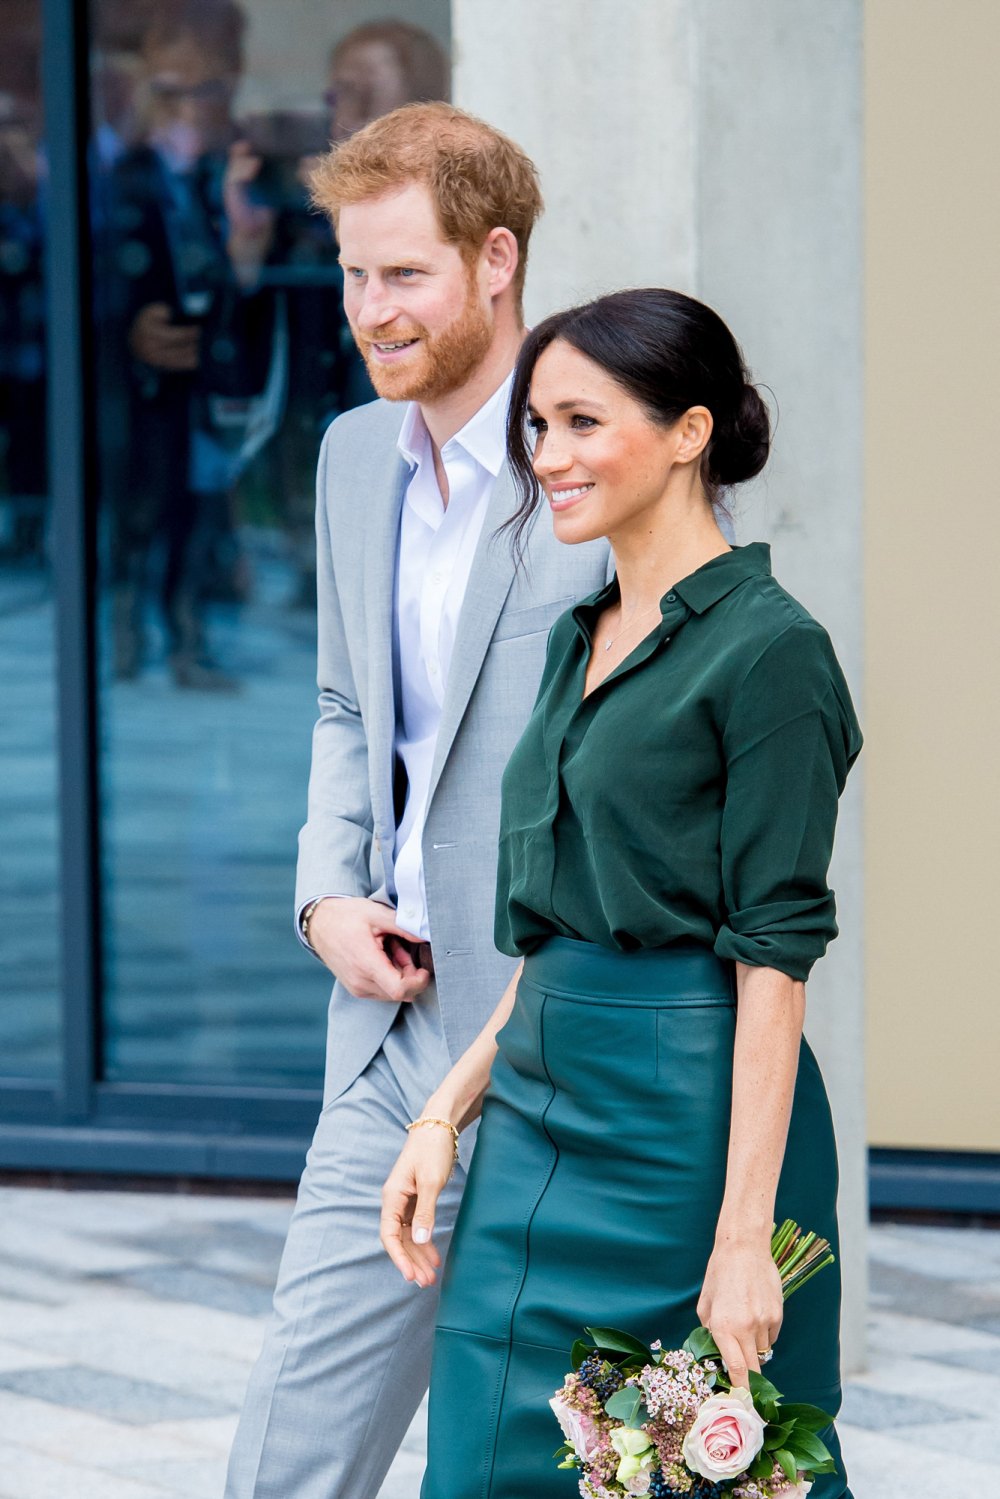 Prince Harry and Meghan Markle Step Out for Date Night Ahead of Her 42nd Birthday